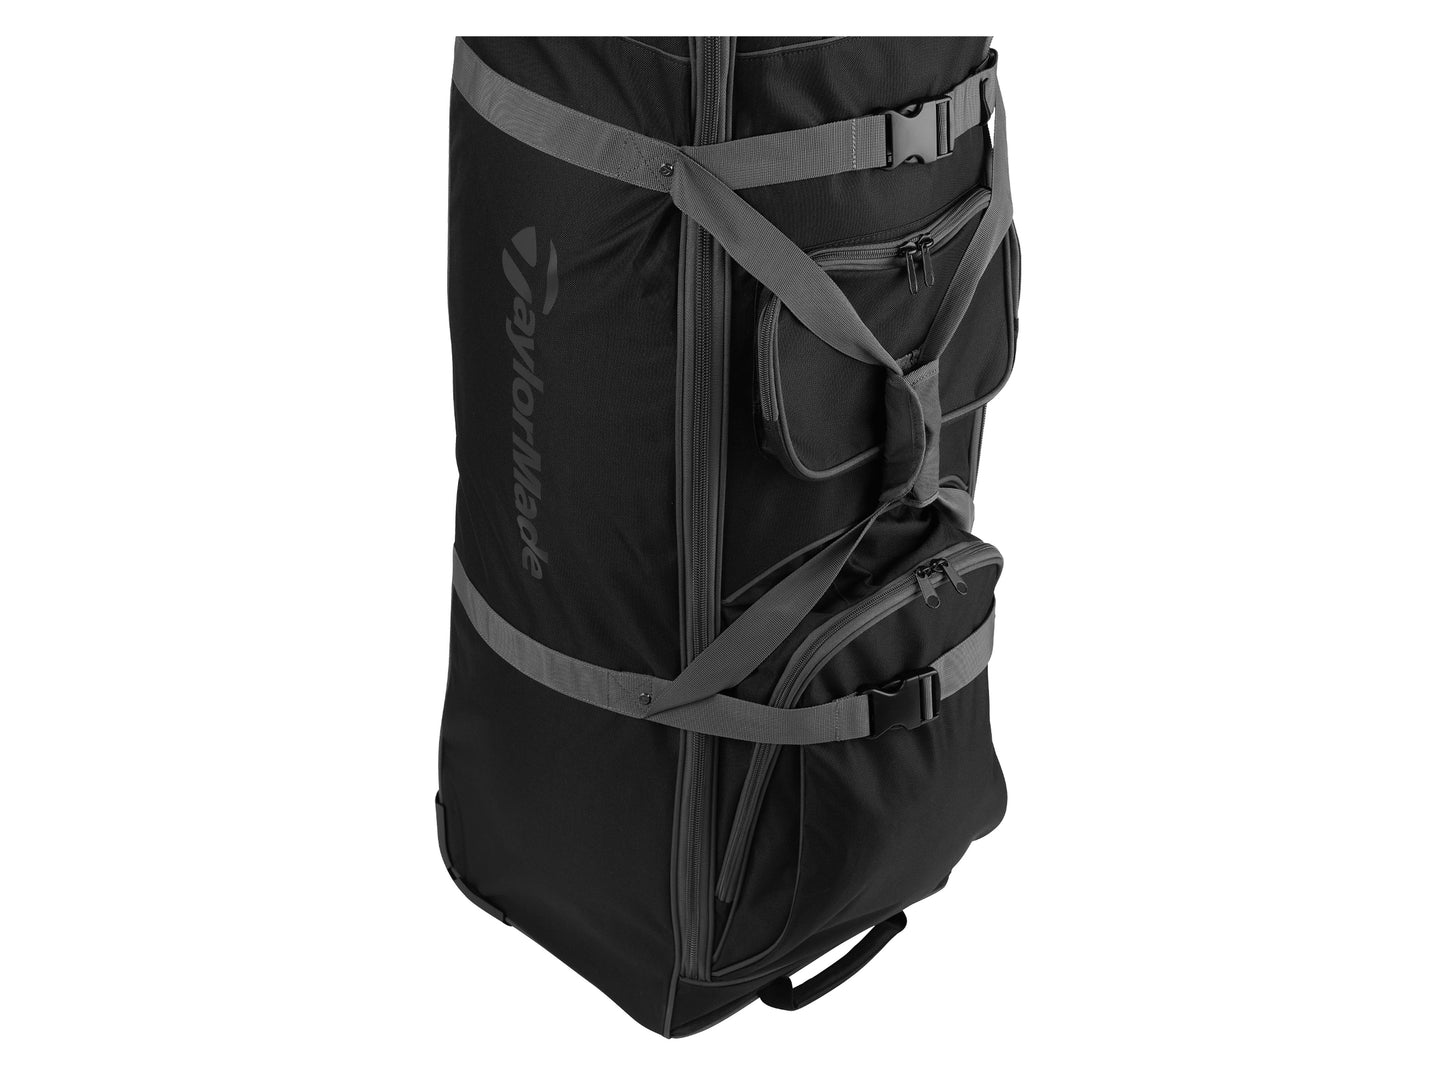 Taylormade Performance Travel Cover